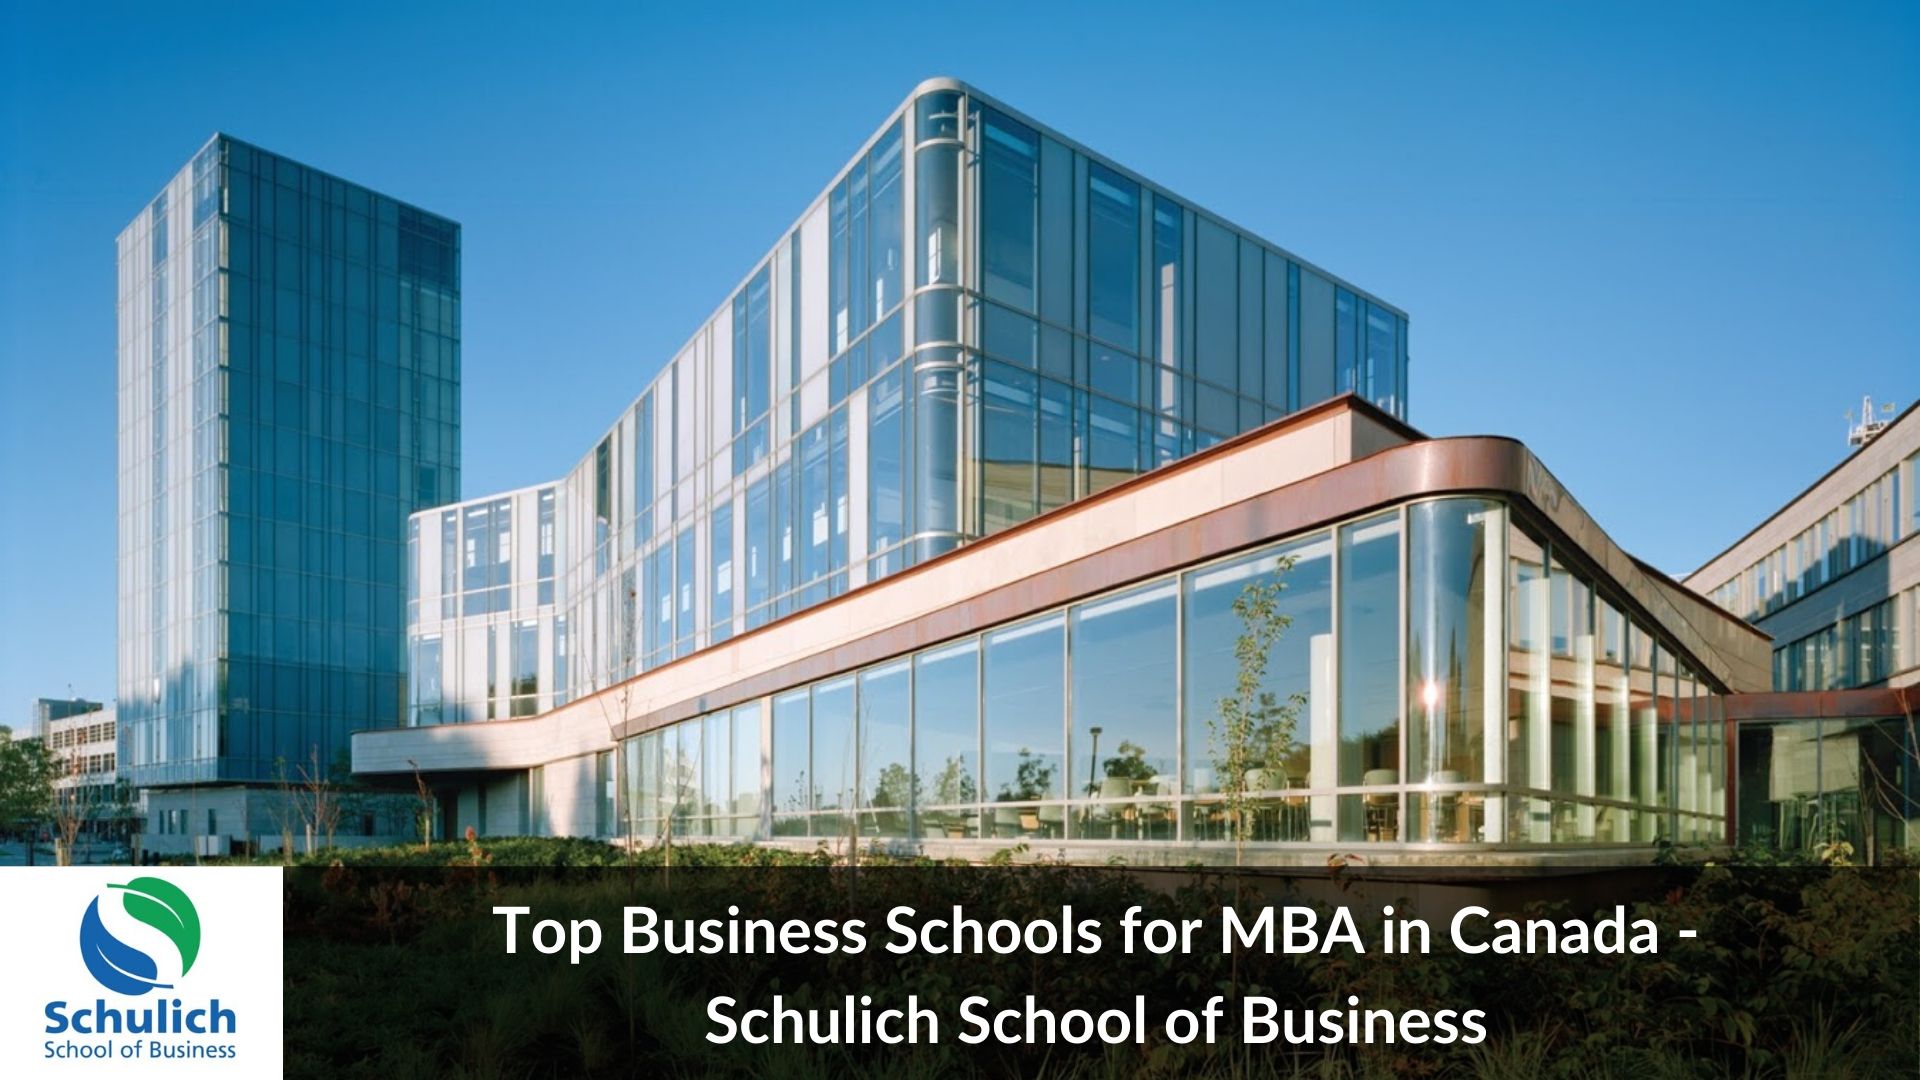 The best MBA in Canada is offered by the University of Toronto and the University of British Columbia. These programs are recognized globally for their academic excellence, diverse student body, and strong industry connections.